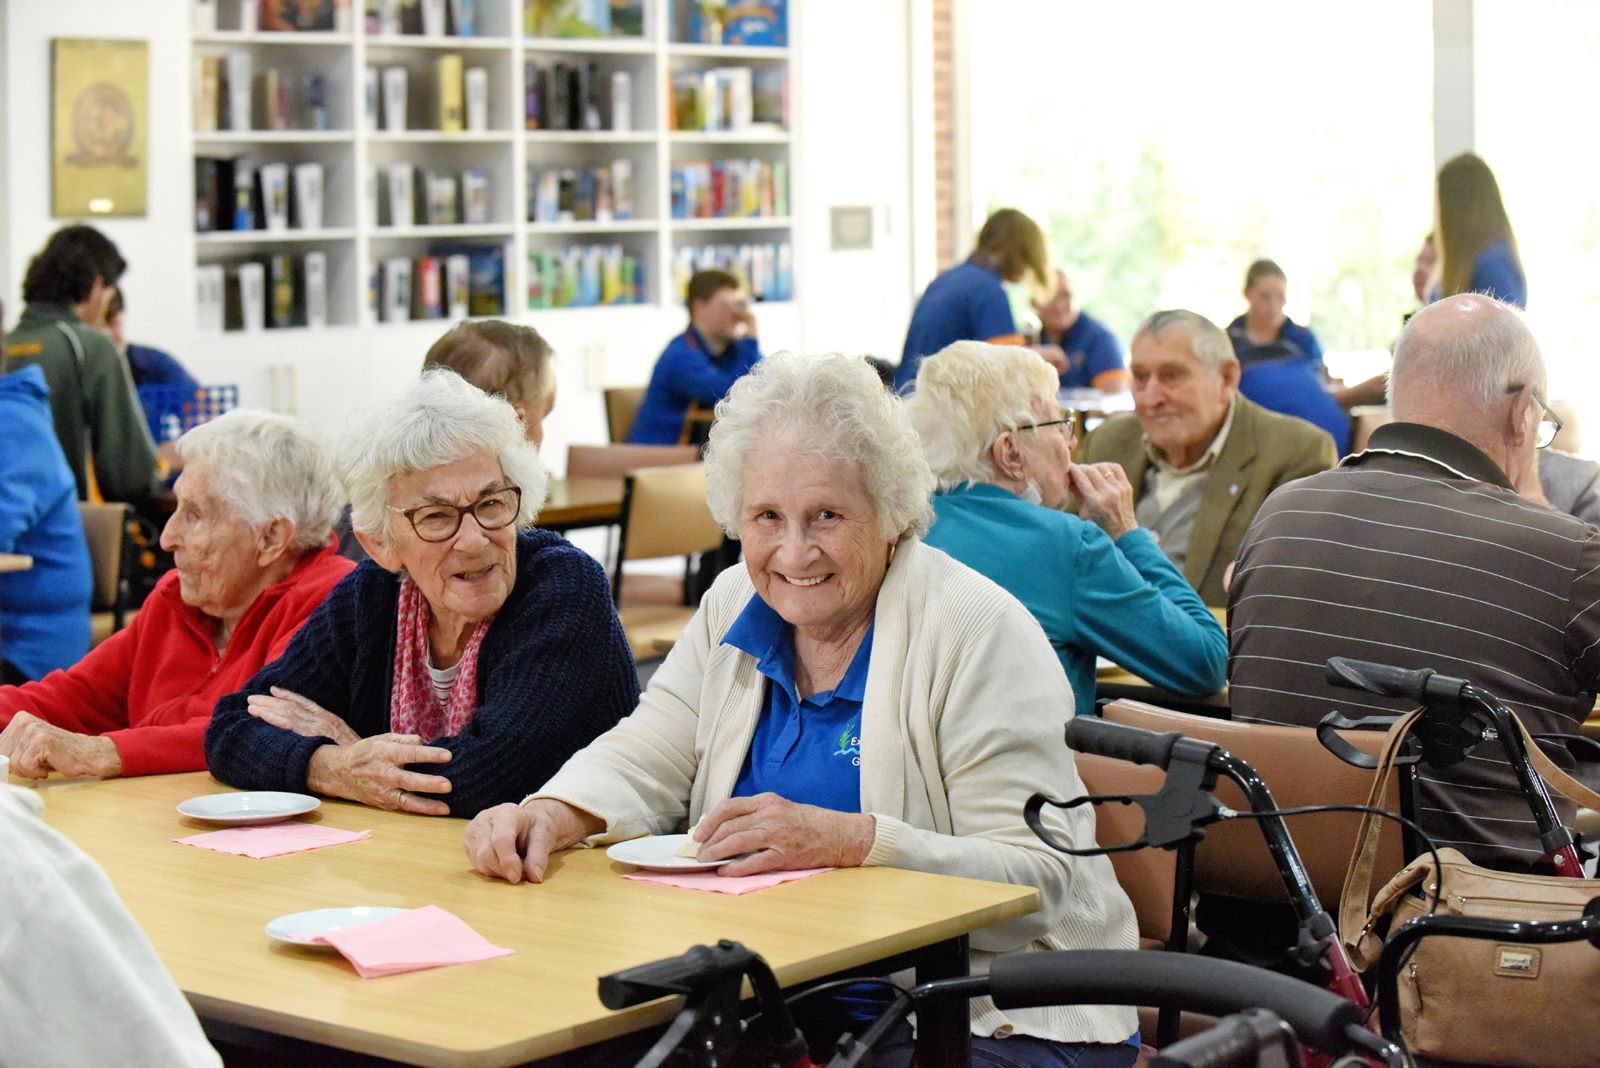 Elderly people in a group setting sitting at tables with their walkers next to them, and some students in the background.  